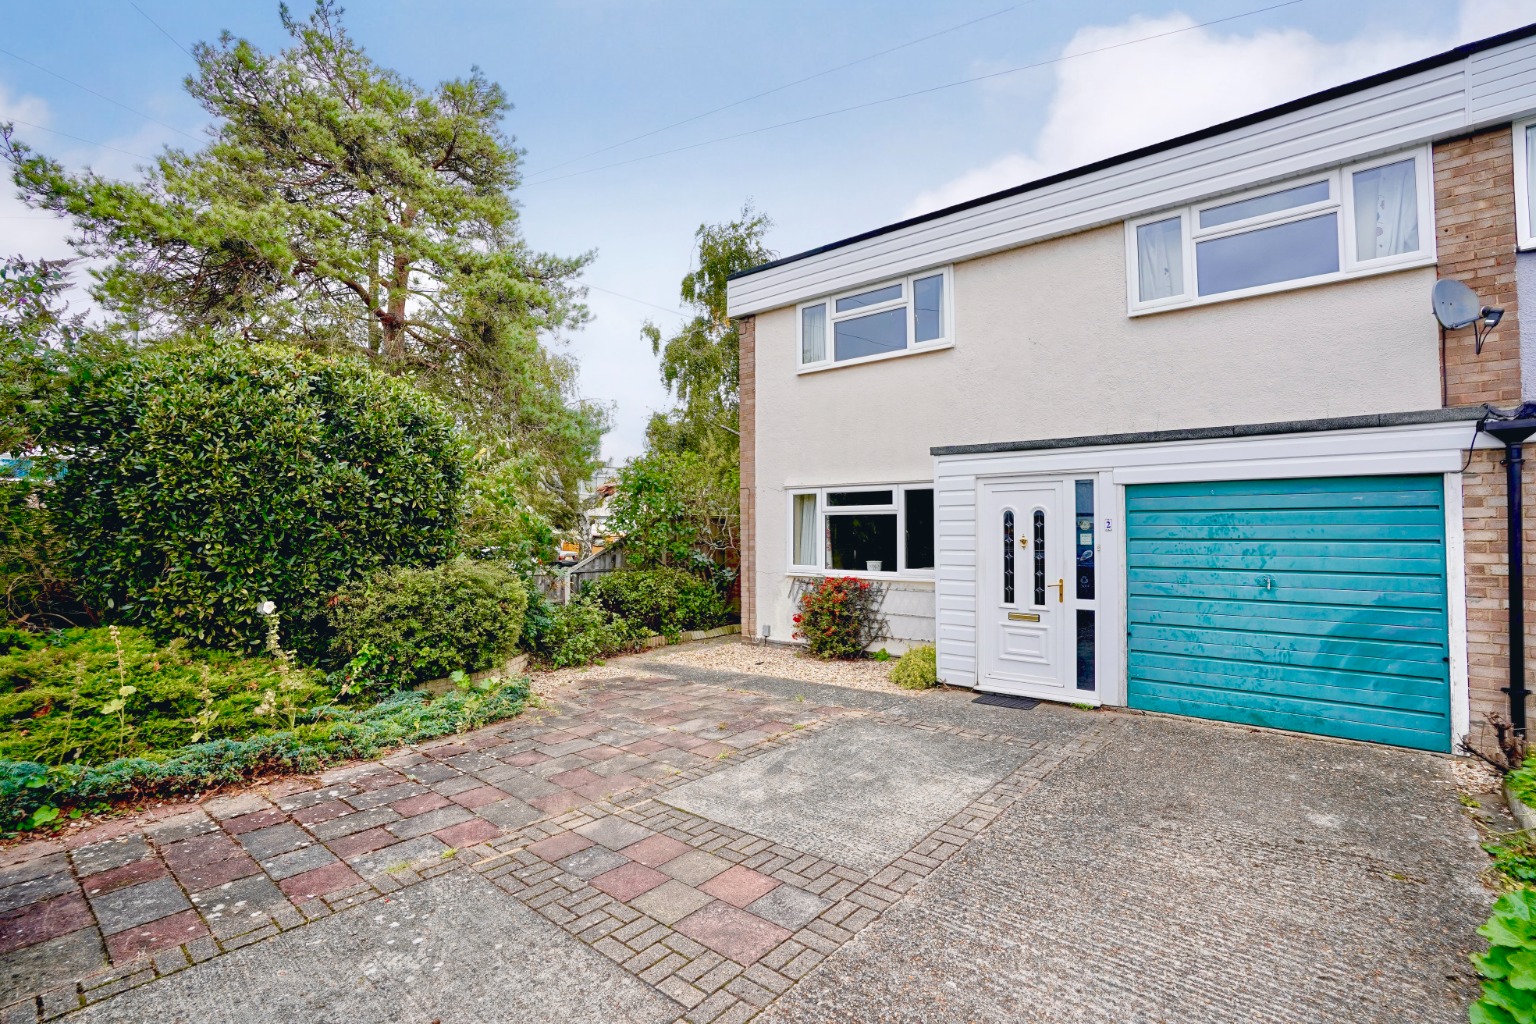 4 bed end of terrace house for sale in Ouse Road, St. Neots  - Property Image 1